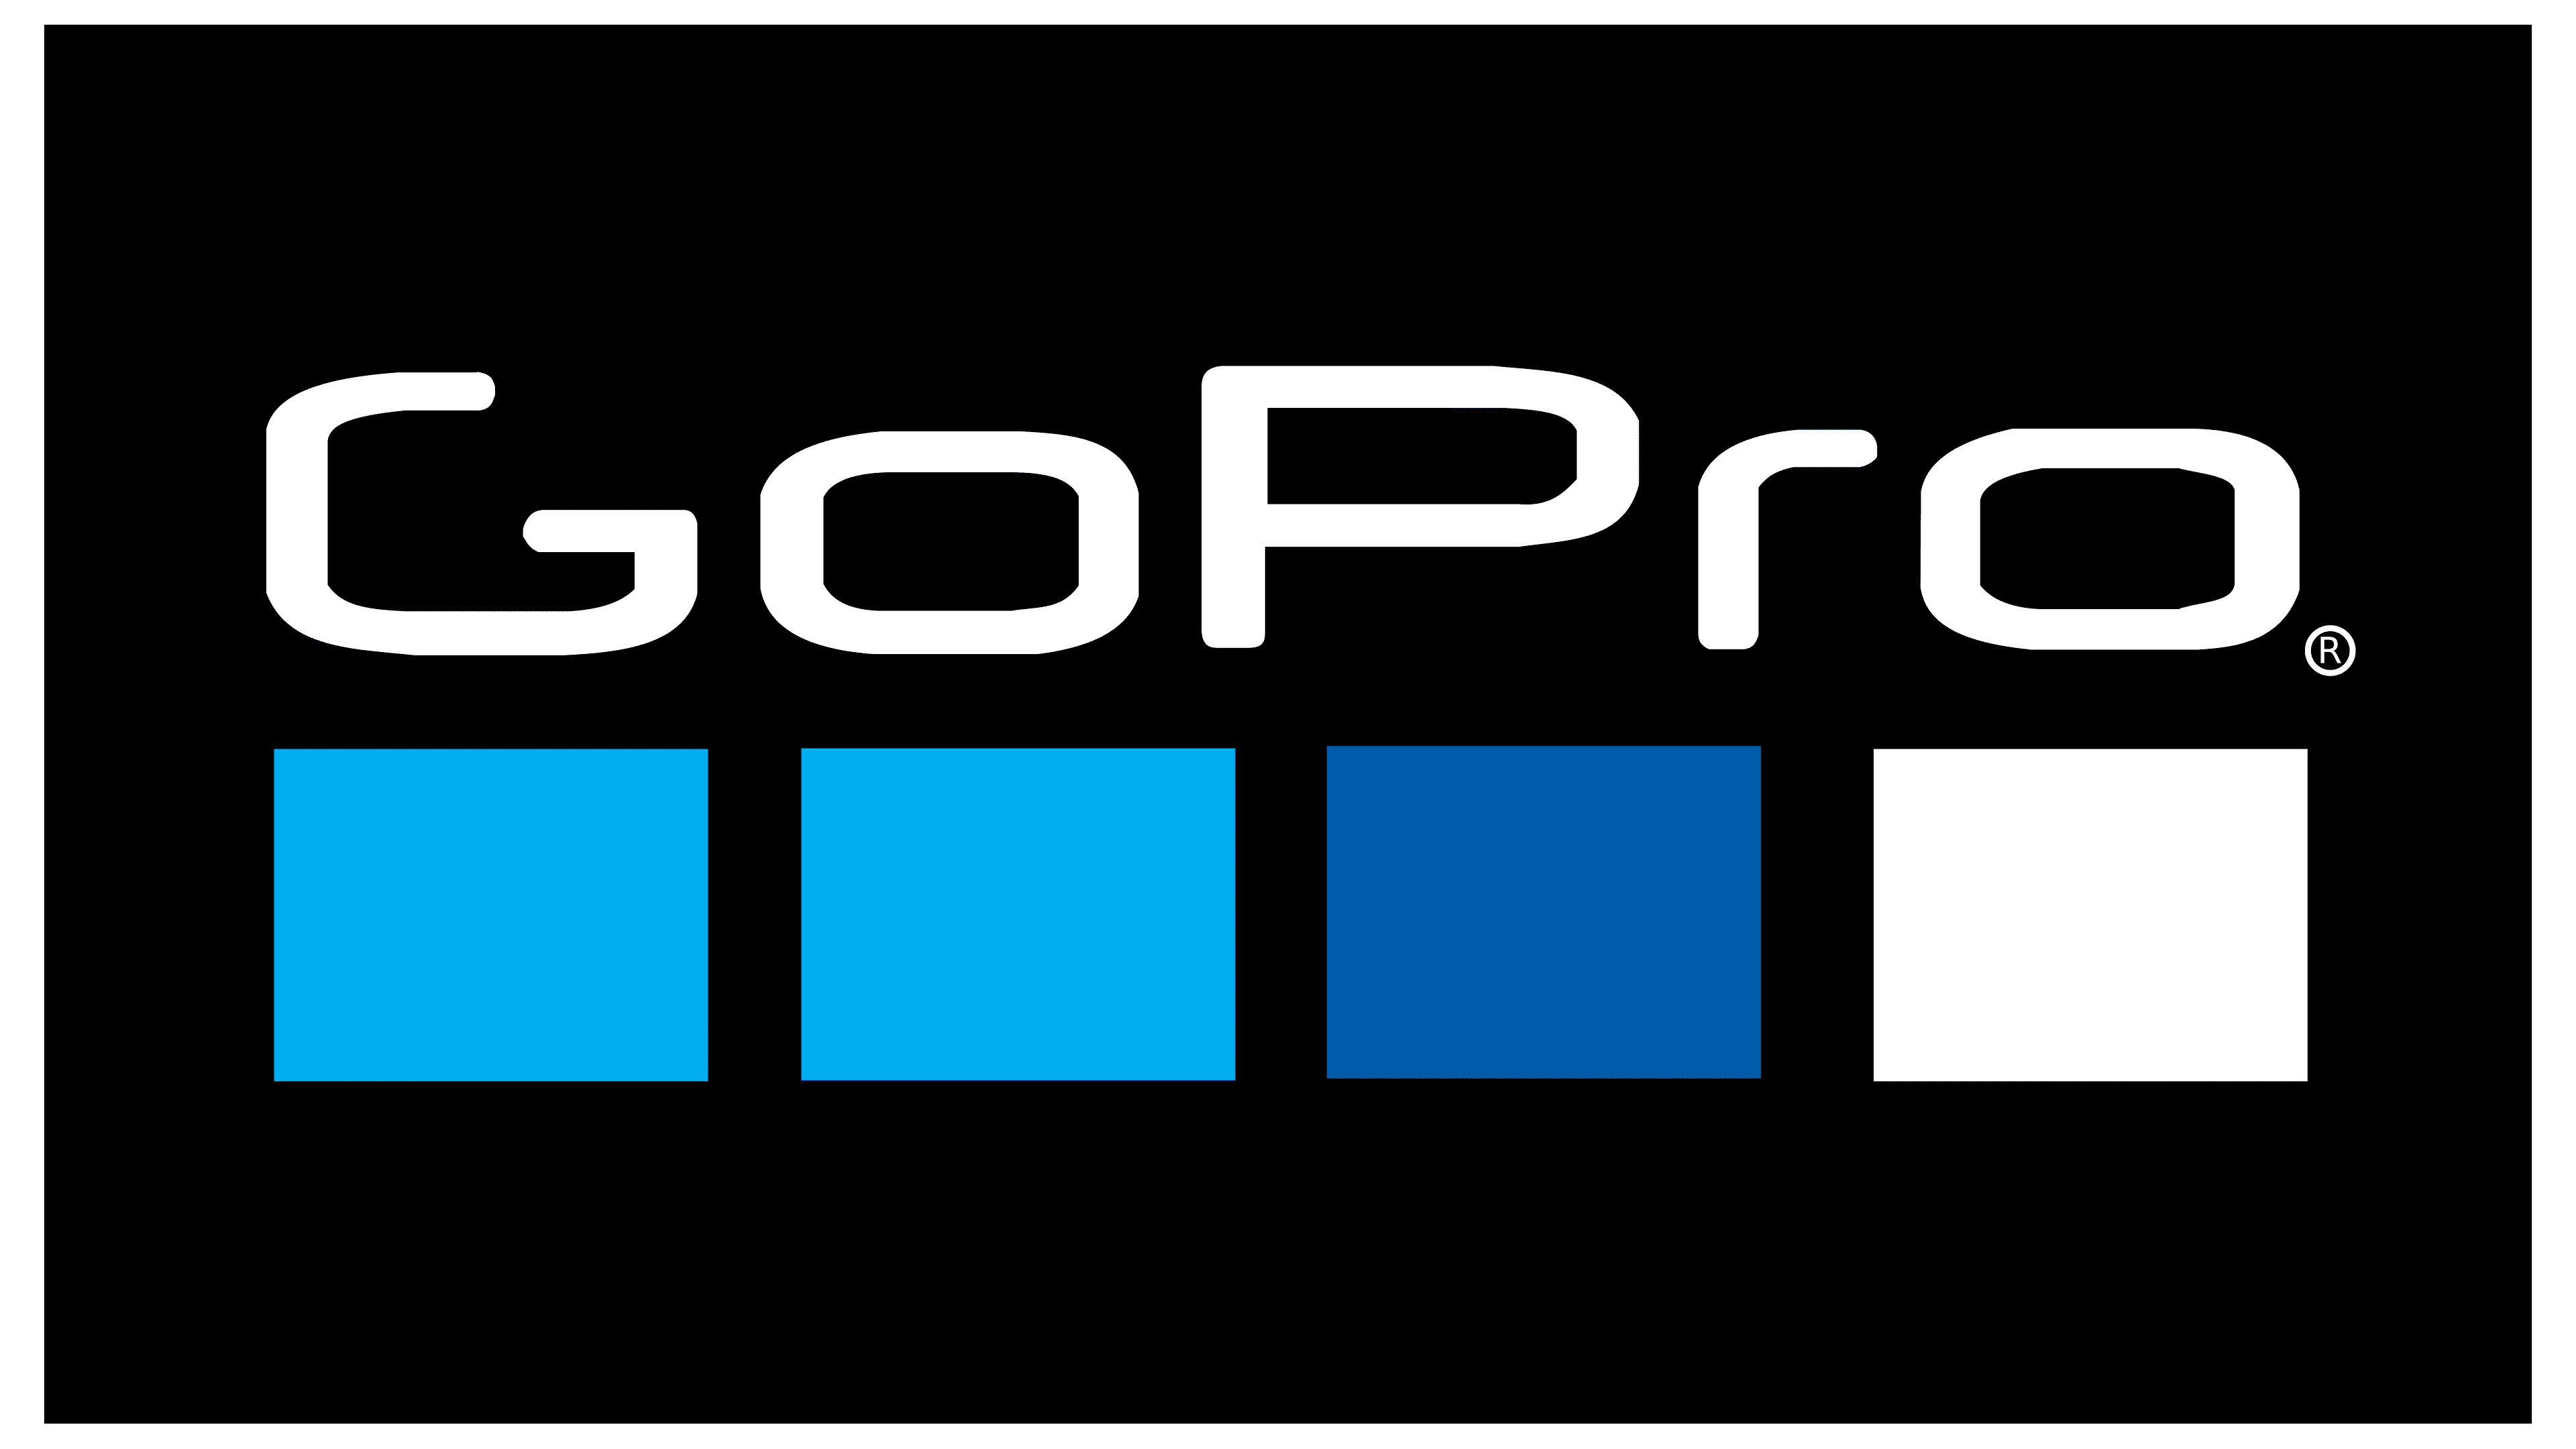 GoPro Logo | The most famous brands and company logos in the world